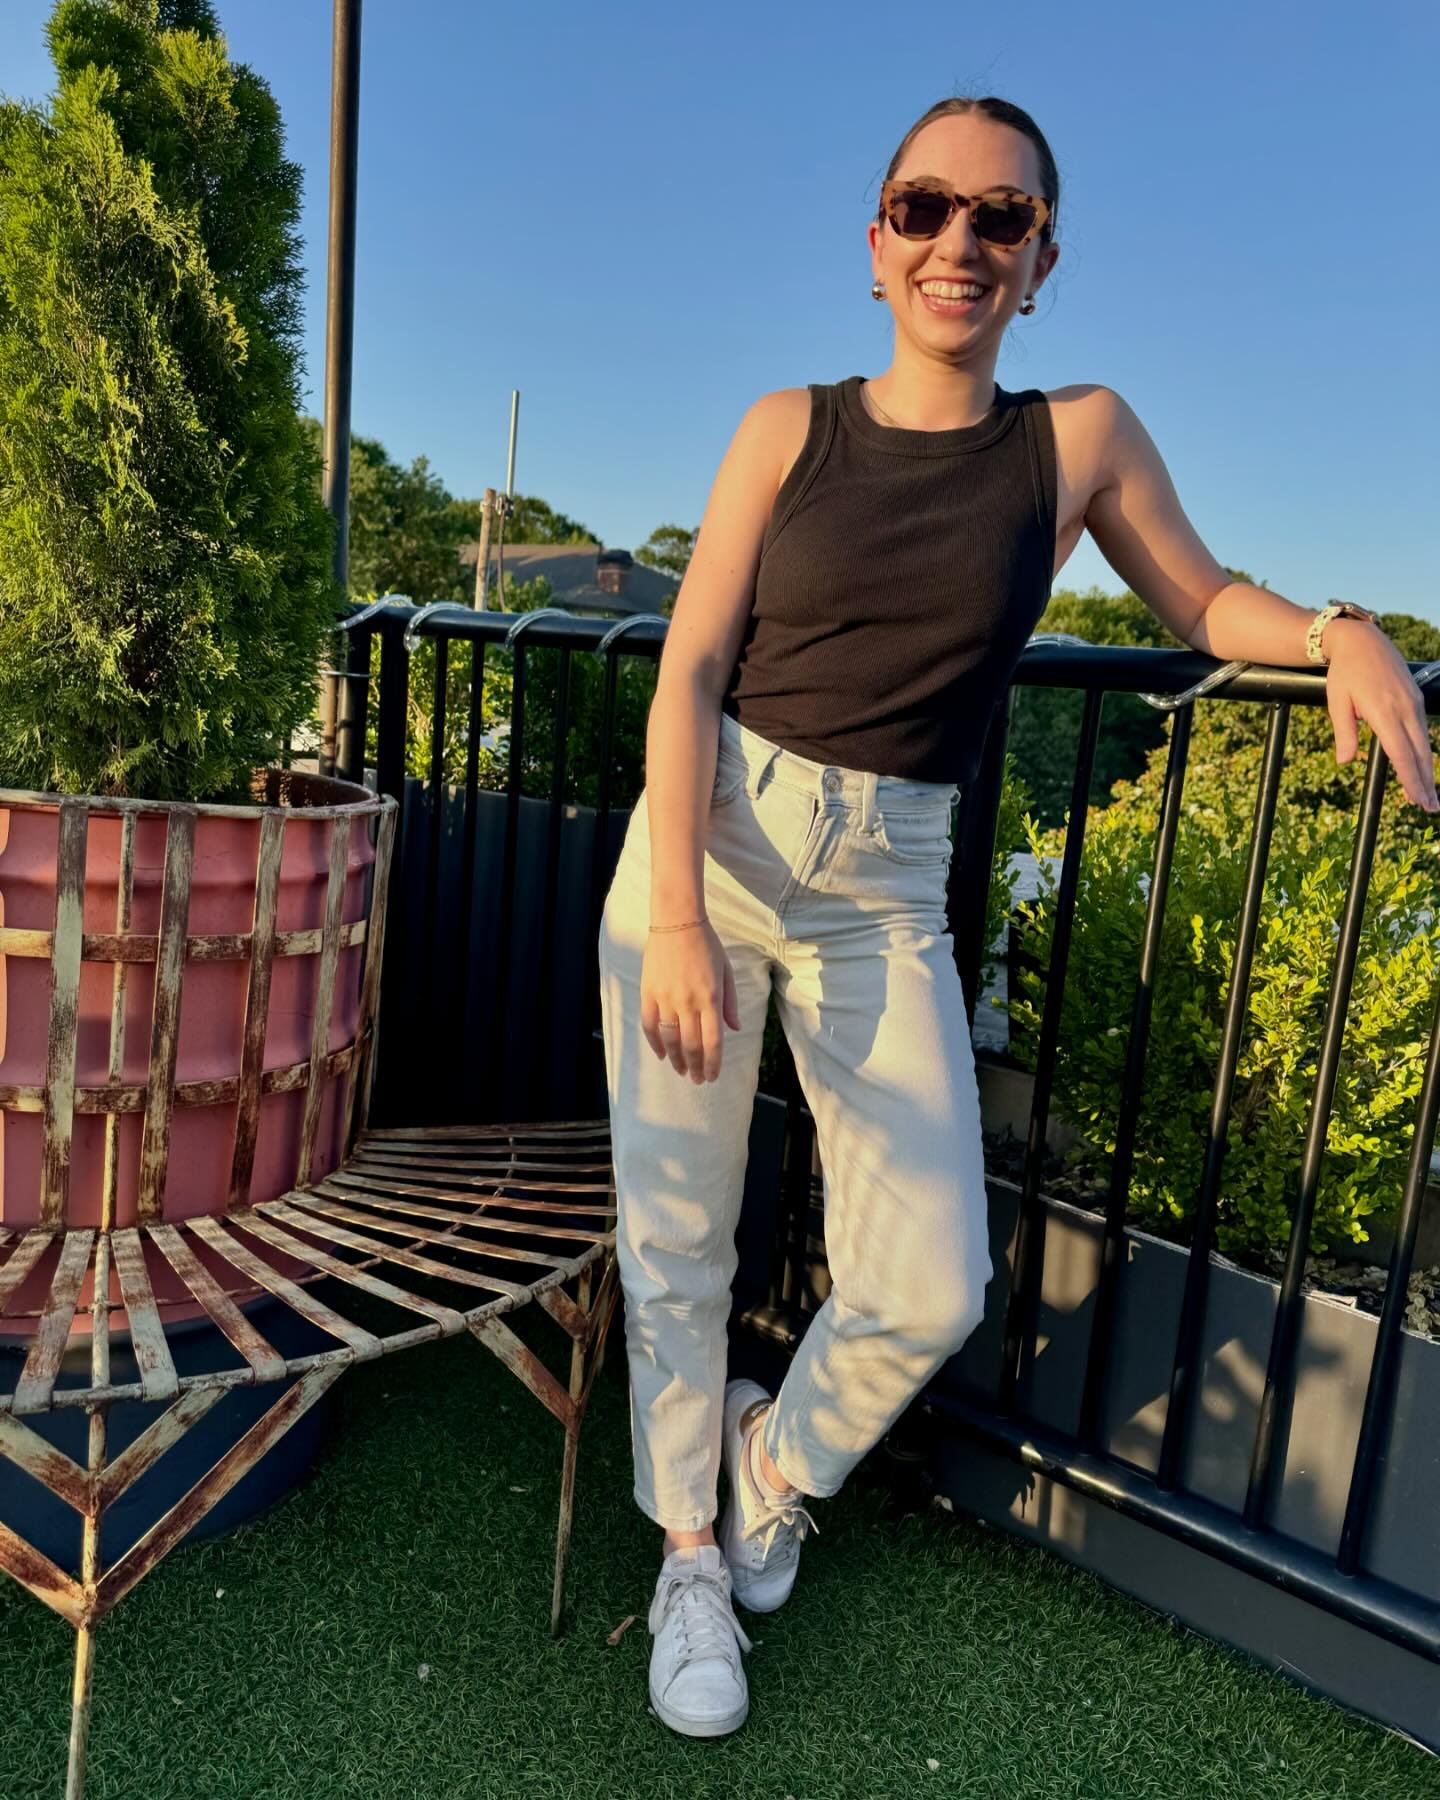 Sumer style tip: lighten up! ☀️ Combine your go-to&rsquo;s (like this black tank) with light colored bottoms to feel &ldquo;in-season&rdquo;.

👉 If wearing a dark colored top, swap out your black trousers, dark wash jeans, and navy pants for options